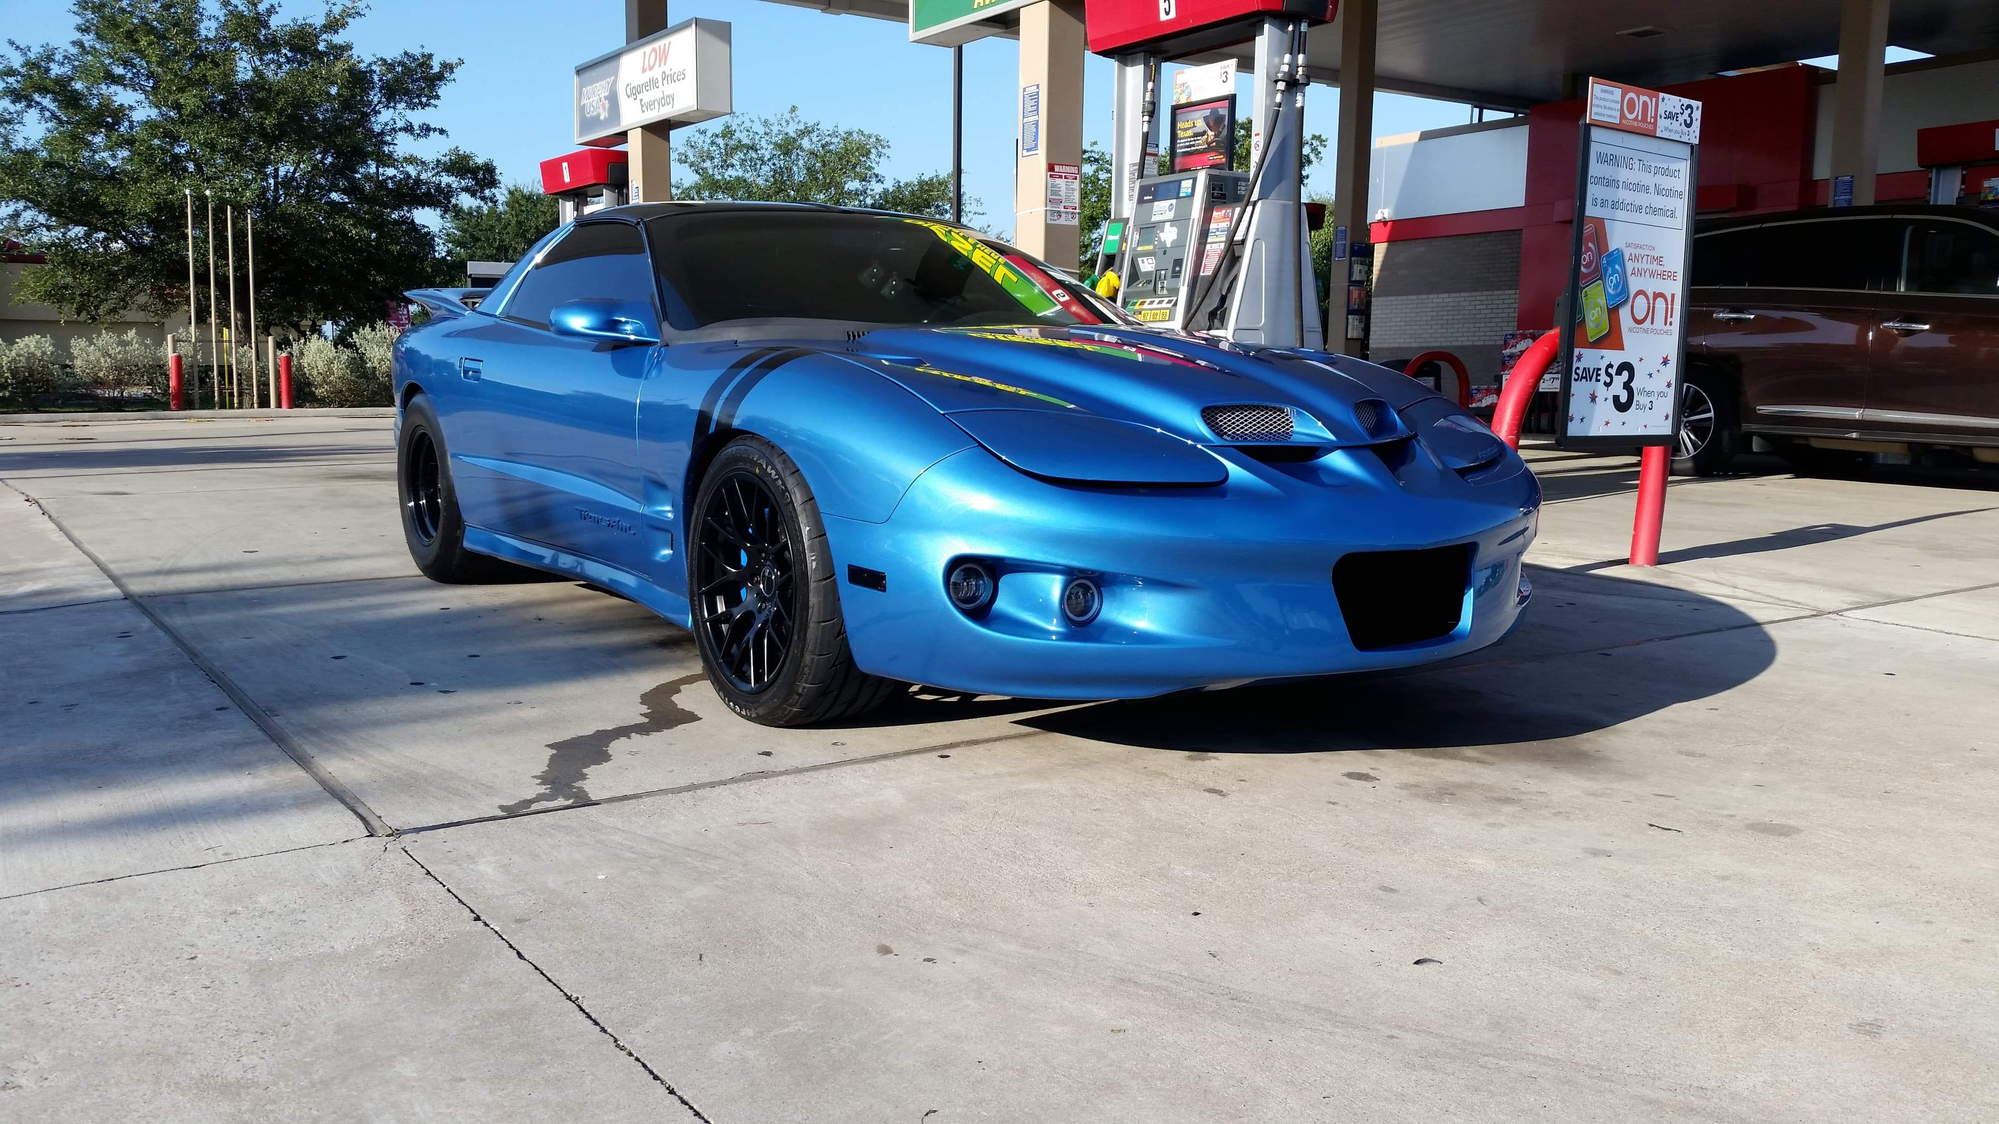 1999 Pontiac Firebird - 99' MBM Twin Turbo 800+WHP M6 Trans Am 1 of 157 Made 75000 Miles - Used - VIN 2G2FV22G3X2231506 - 75,000 Miles - 8 cyl - 2WD - Manual - Coupe - Blue - Columbus, TX 78934, United States